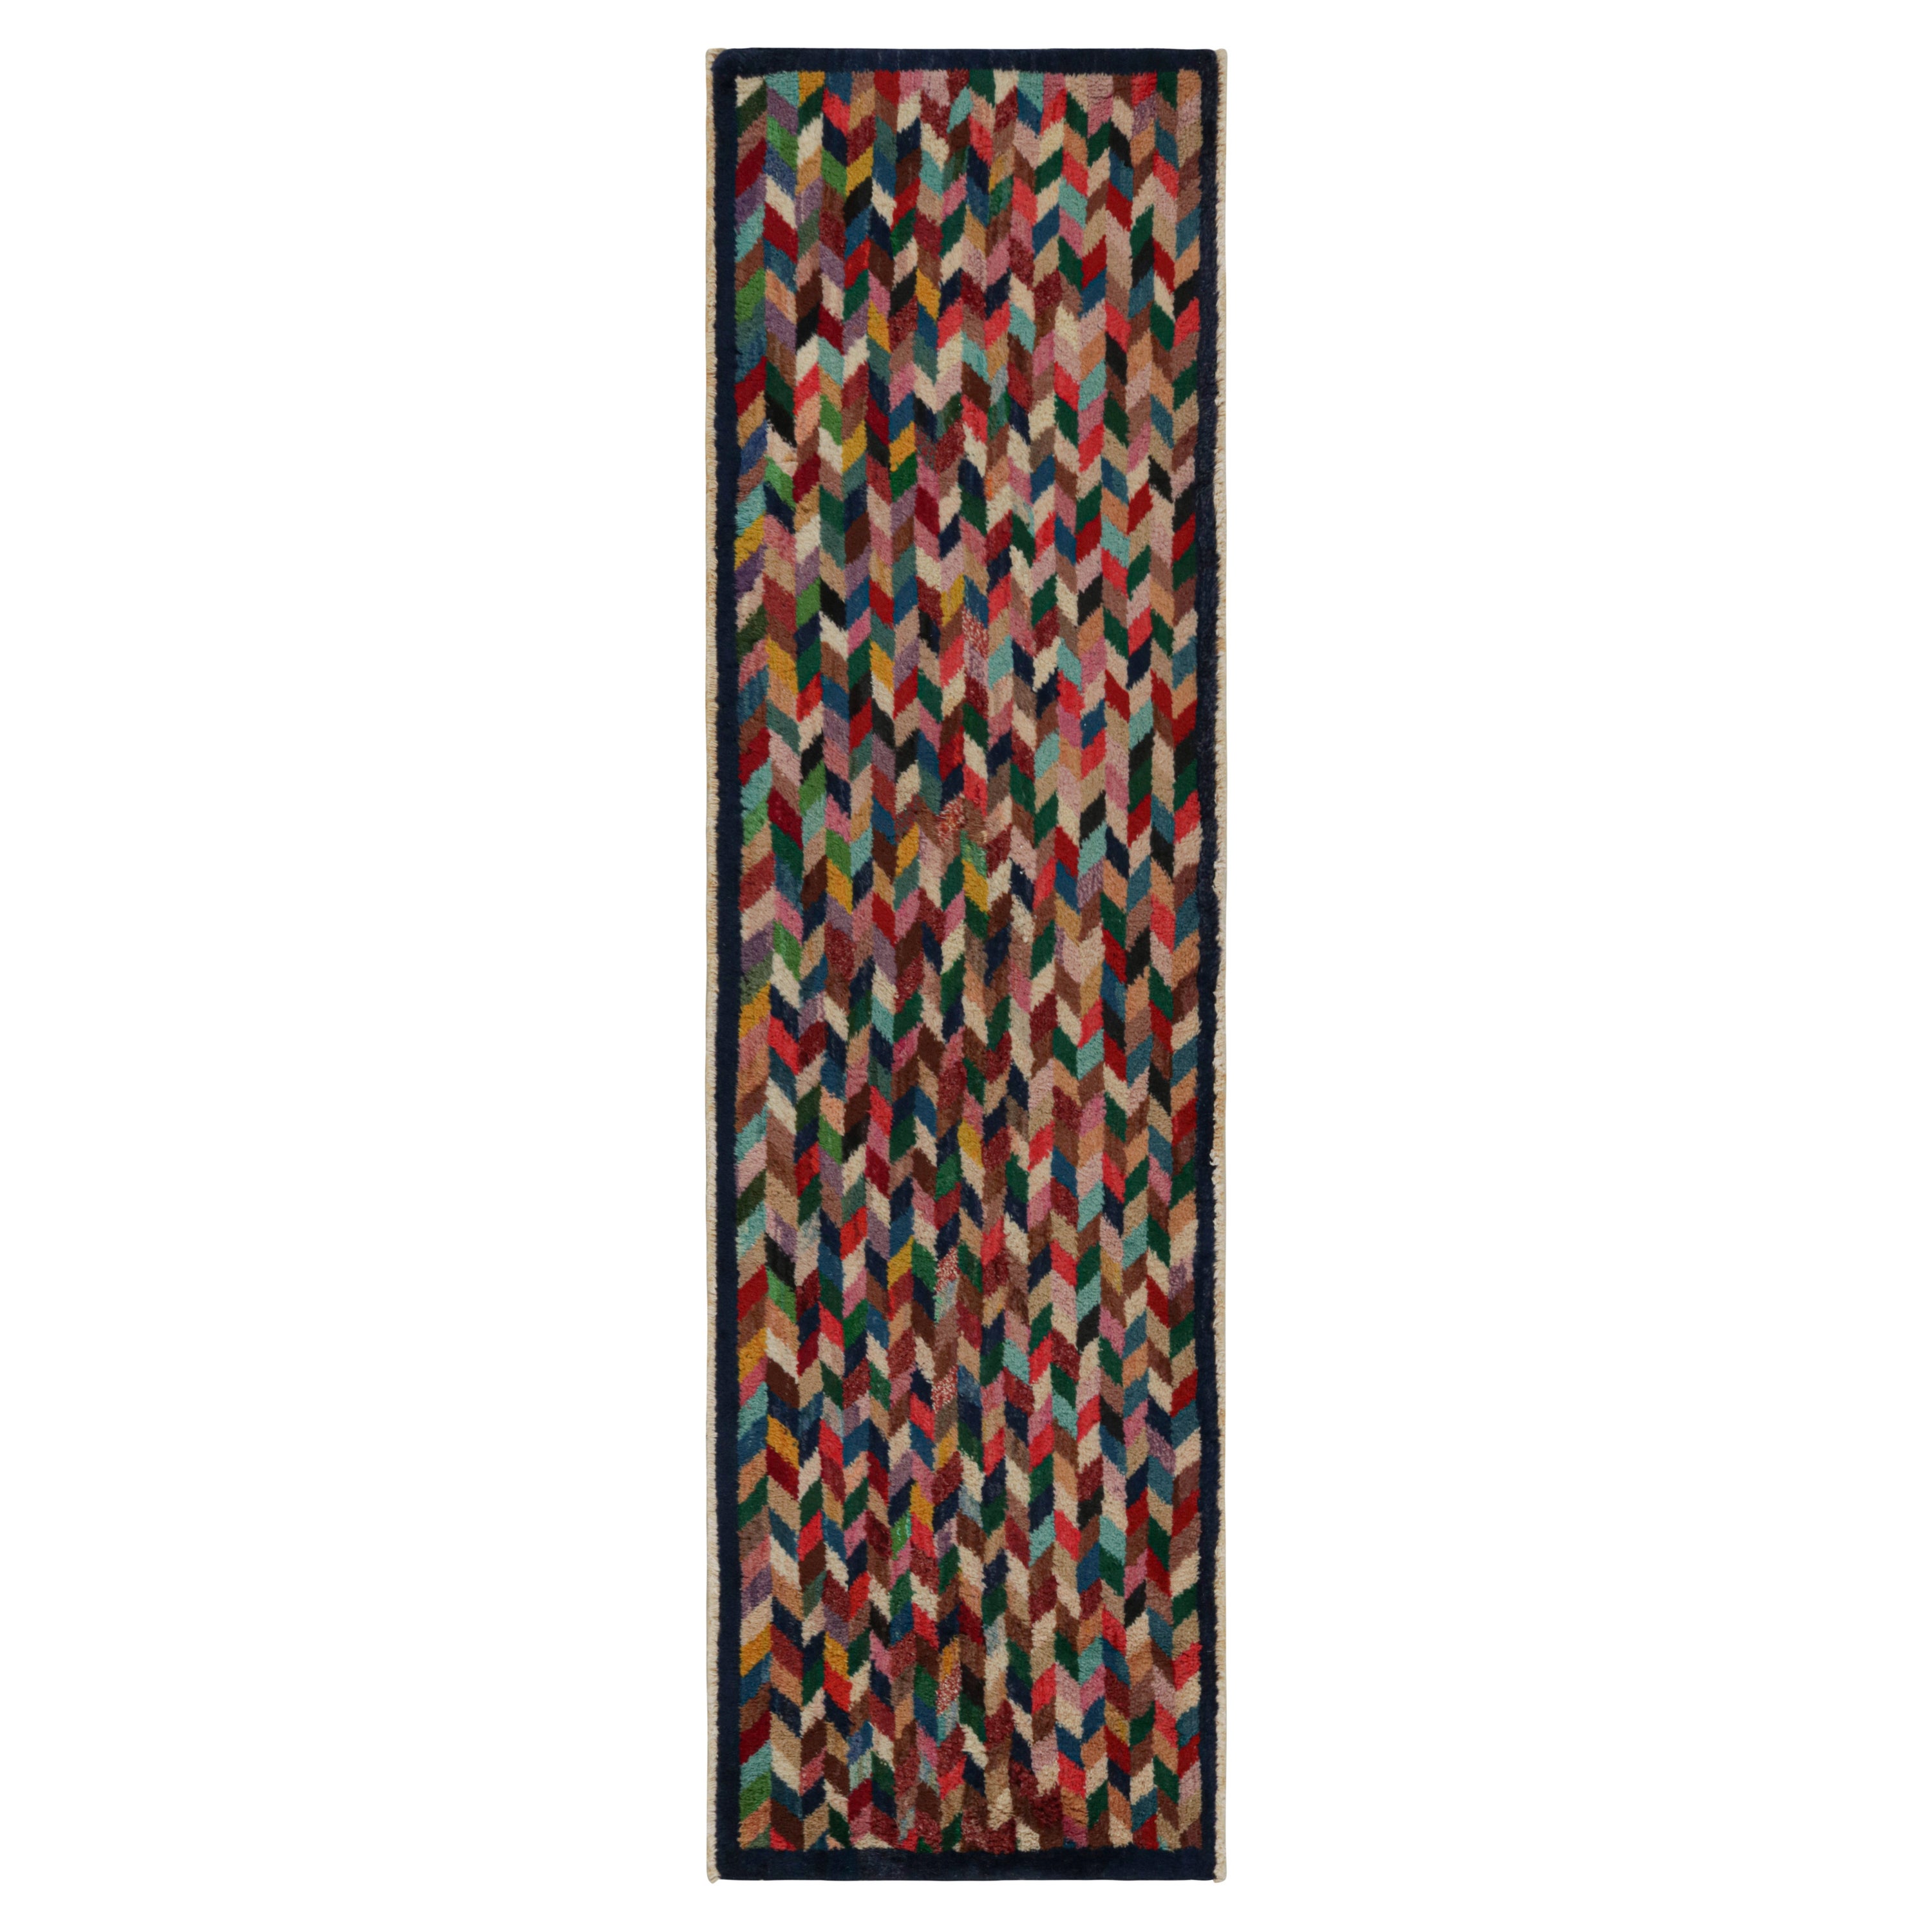 Vintage Afghan runner rug, in Polychromatic Geometric Patterns, from Rug & Kilim For Sale